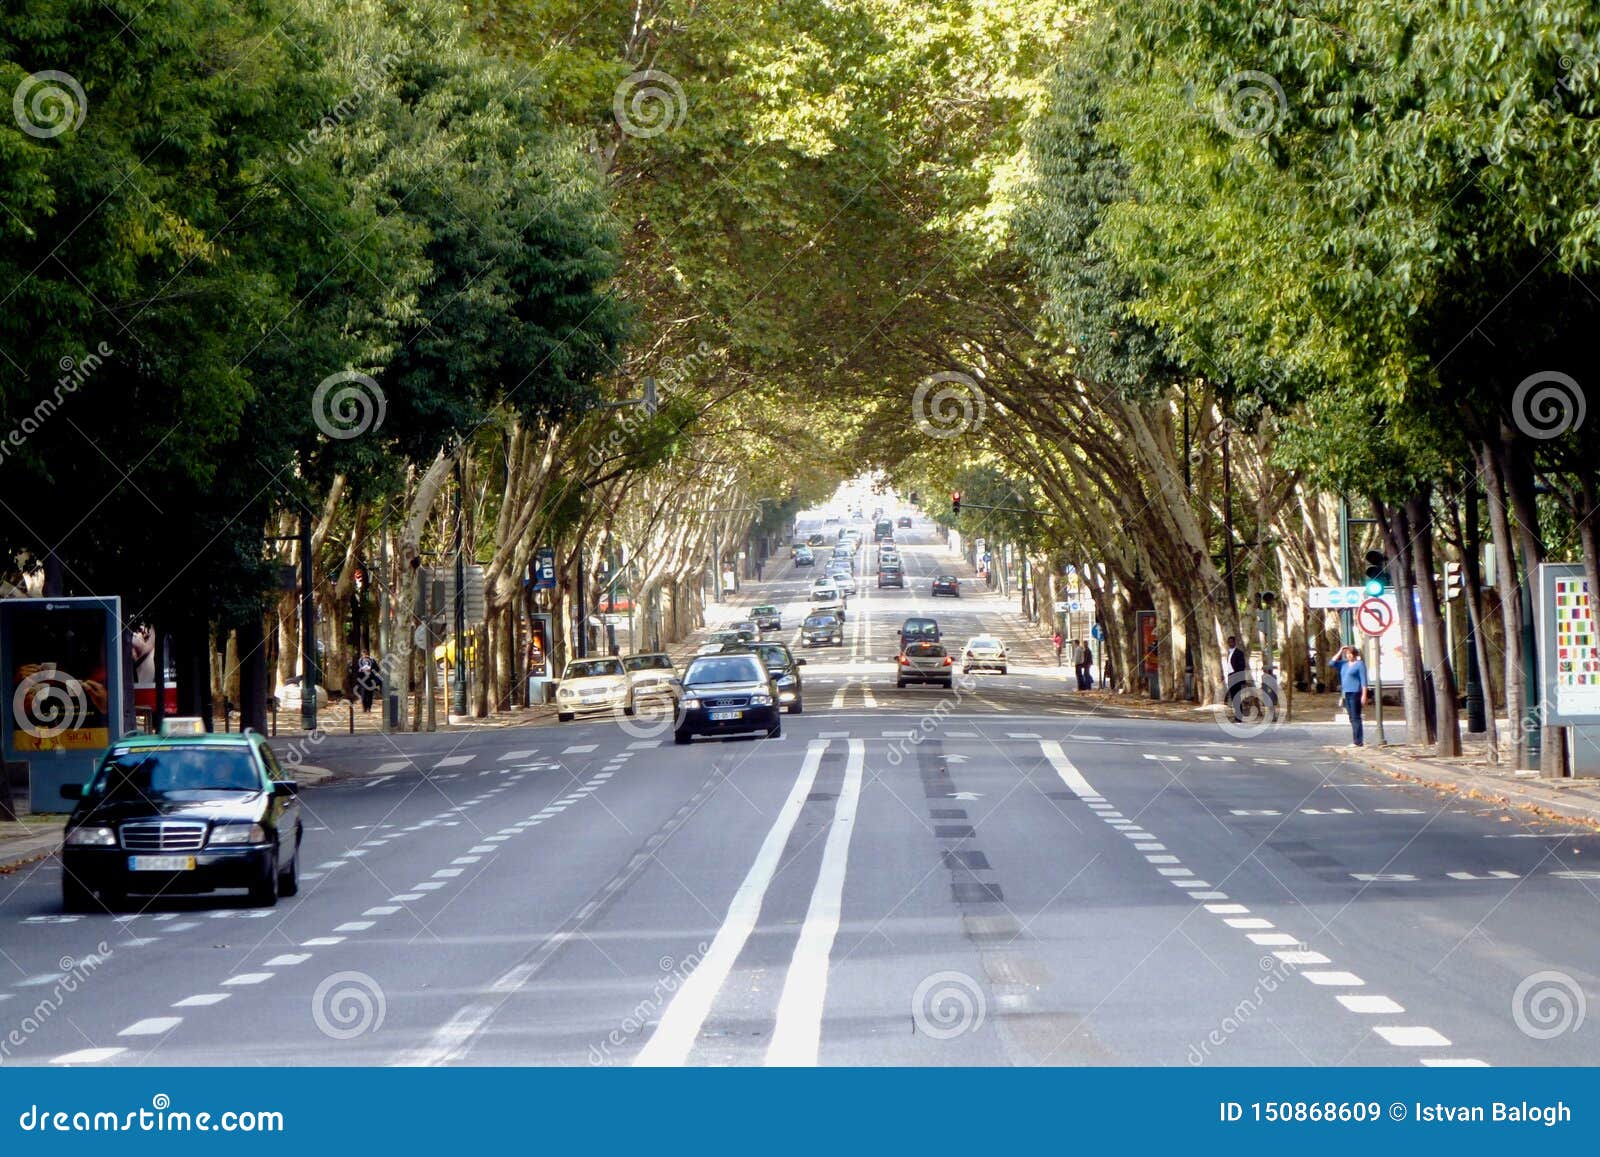 lisbon, portugal: avinada de liberdade avenue with arching green trees over the highway